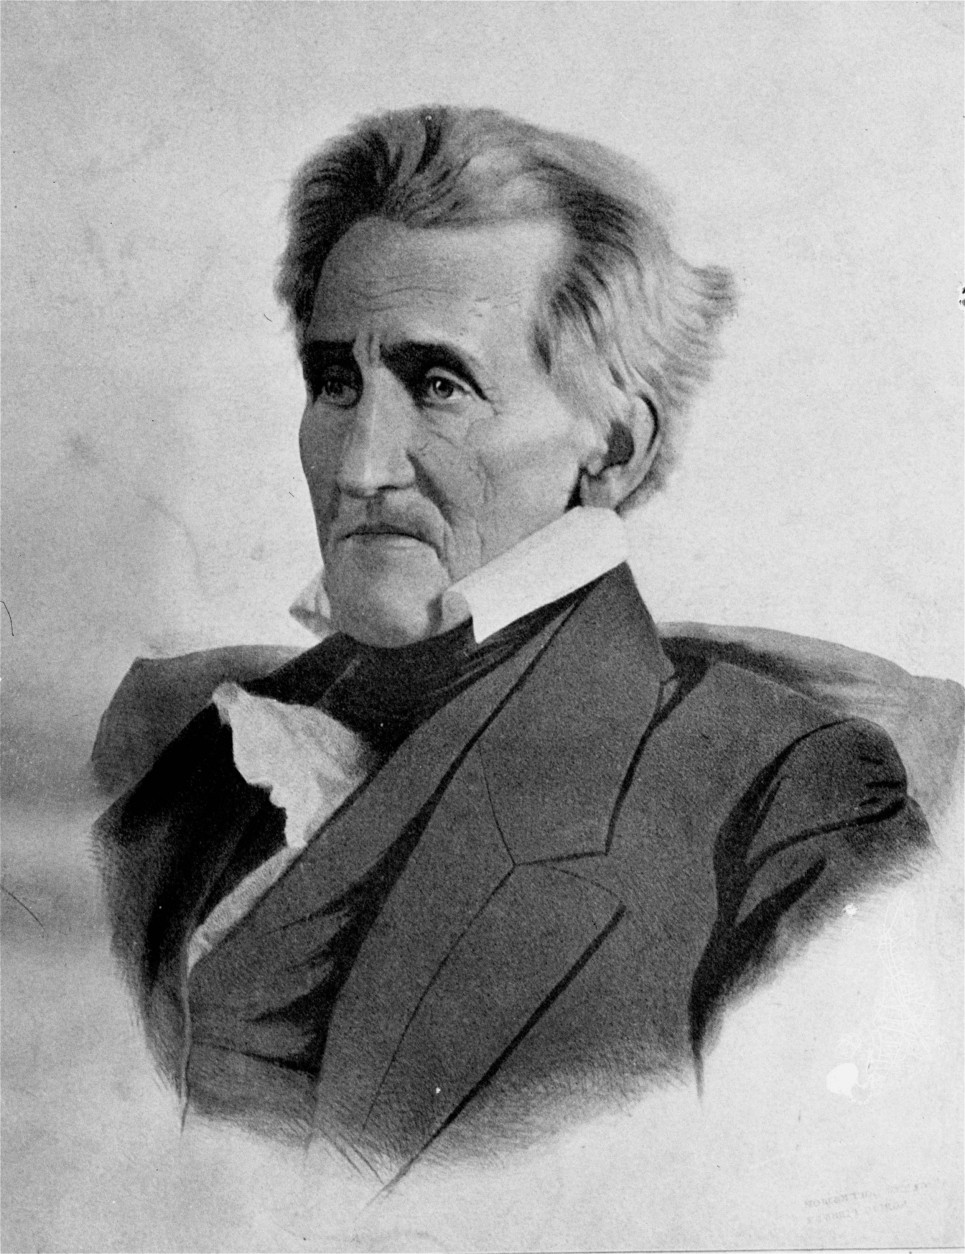 <p><strong>Andrew “The Equalizer” Jackson (1829—1837)</strong></p>
<p>Don’t get Andrew Jackson angry. You wouldn’t like him when he’s angry.</p>
<p>First off, in 1806 he killed Charles Dickinson in a duel over — well, it was a combination of things, including an insult to Jackson’s wife and a horse race. Jackson was coldblooded about it too: Dickinson fired first and hit Jackson in the chest; the rules said he then had to stand still while Jackson took his shot. &#8220;I should have hit him if he had shot me through the brain,&#8221; Jackson later said.</p>
<p>Jackson could’ve fired into the air; he could’ve given it up when his pistol misfired. But no: He stood there and killed his opponent. Dickinson’s bullet was too close to Jackson’s heart to operate, so it stayed in his chest the rest of his life.</p>
<p>So Jackson didn’t take slights easily. When he lost the election of 1824 in a skullduggerous manner, he was determined to beat Adams in 1828, and he did. In his first speech to Congress, he called for the elimination of the Electoral College.</p>
<p>In 1832, he found out that the Senate had rejected the nomination of Martin Van Buren, his mentee, to the post of minister to England. His excellent reaction? “By the Eternal! I’ll smash them!” And he basically did: Van Buren became vice president instead, then succeeded Jackson when his second term ran out.</p>
<p>Some people never learn.</p>
